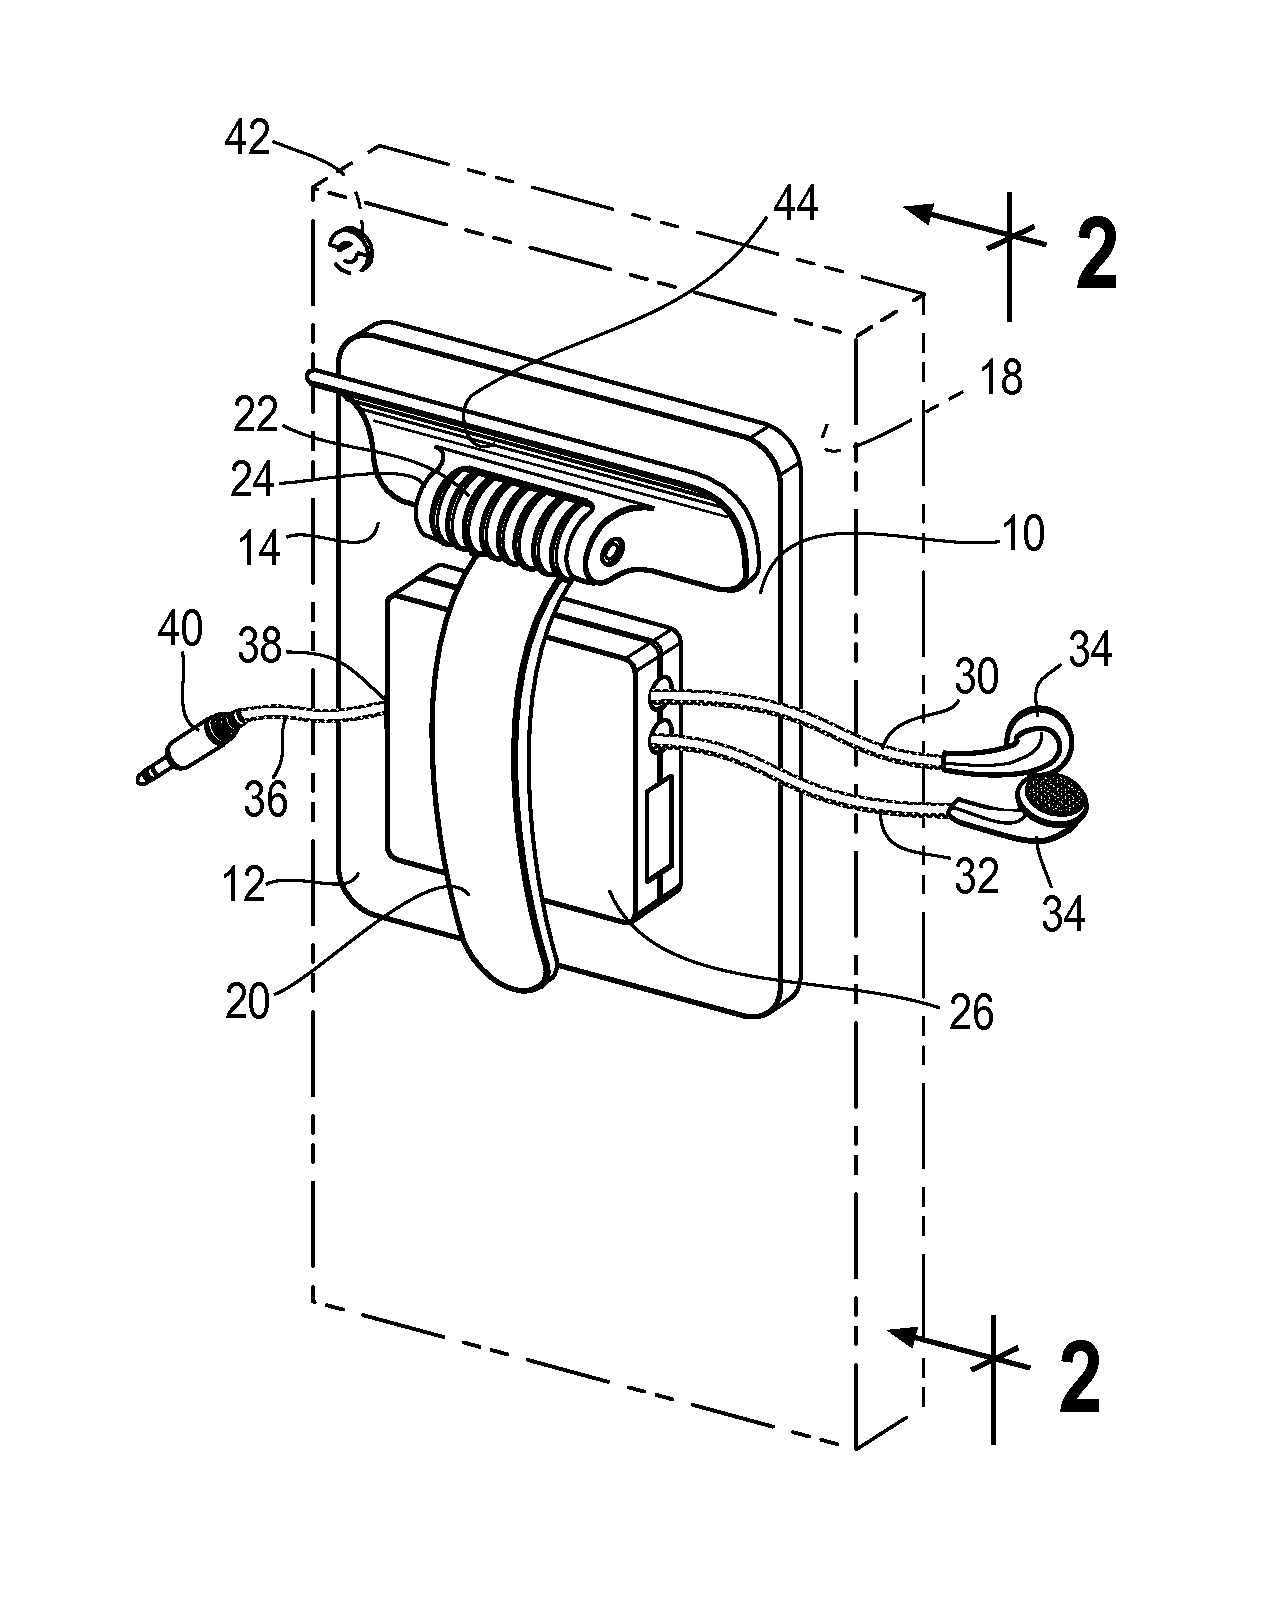 Attachable Extendable and Retractable Earpiece Assembly for Mobile Communication and Sound Devices